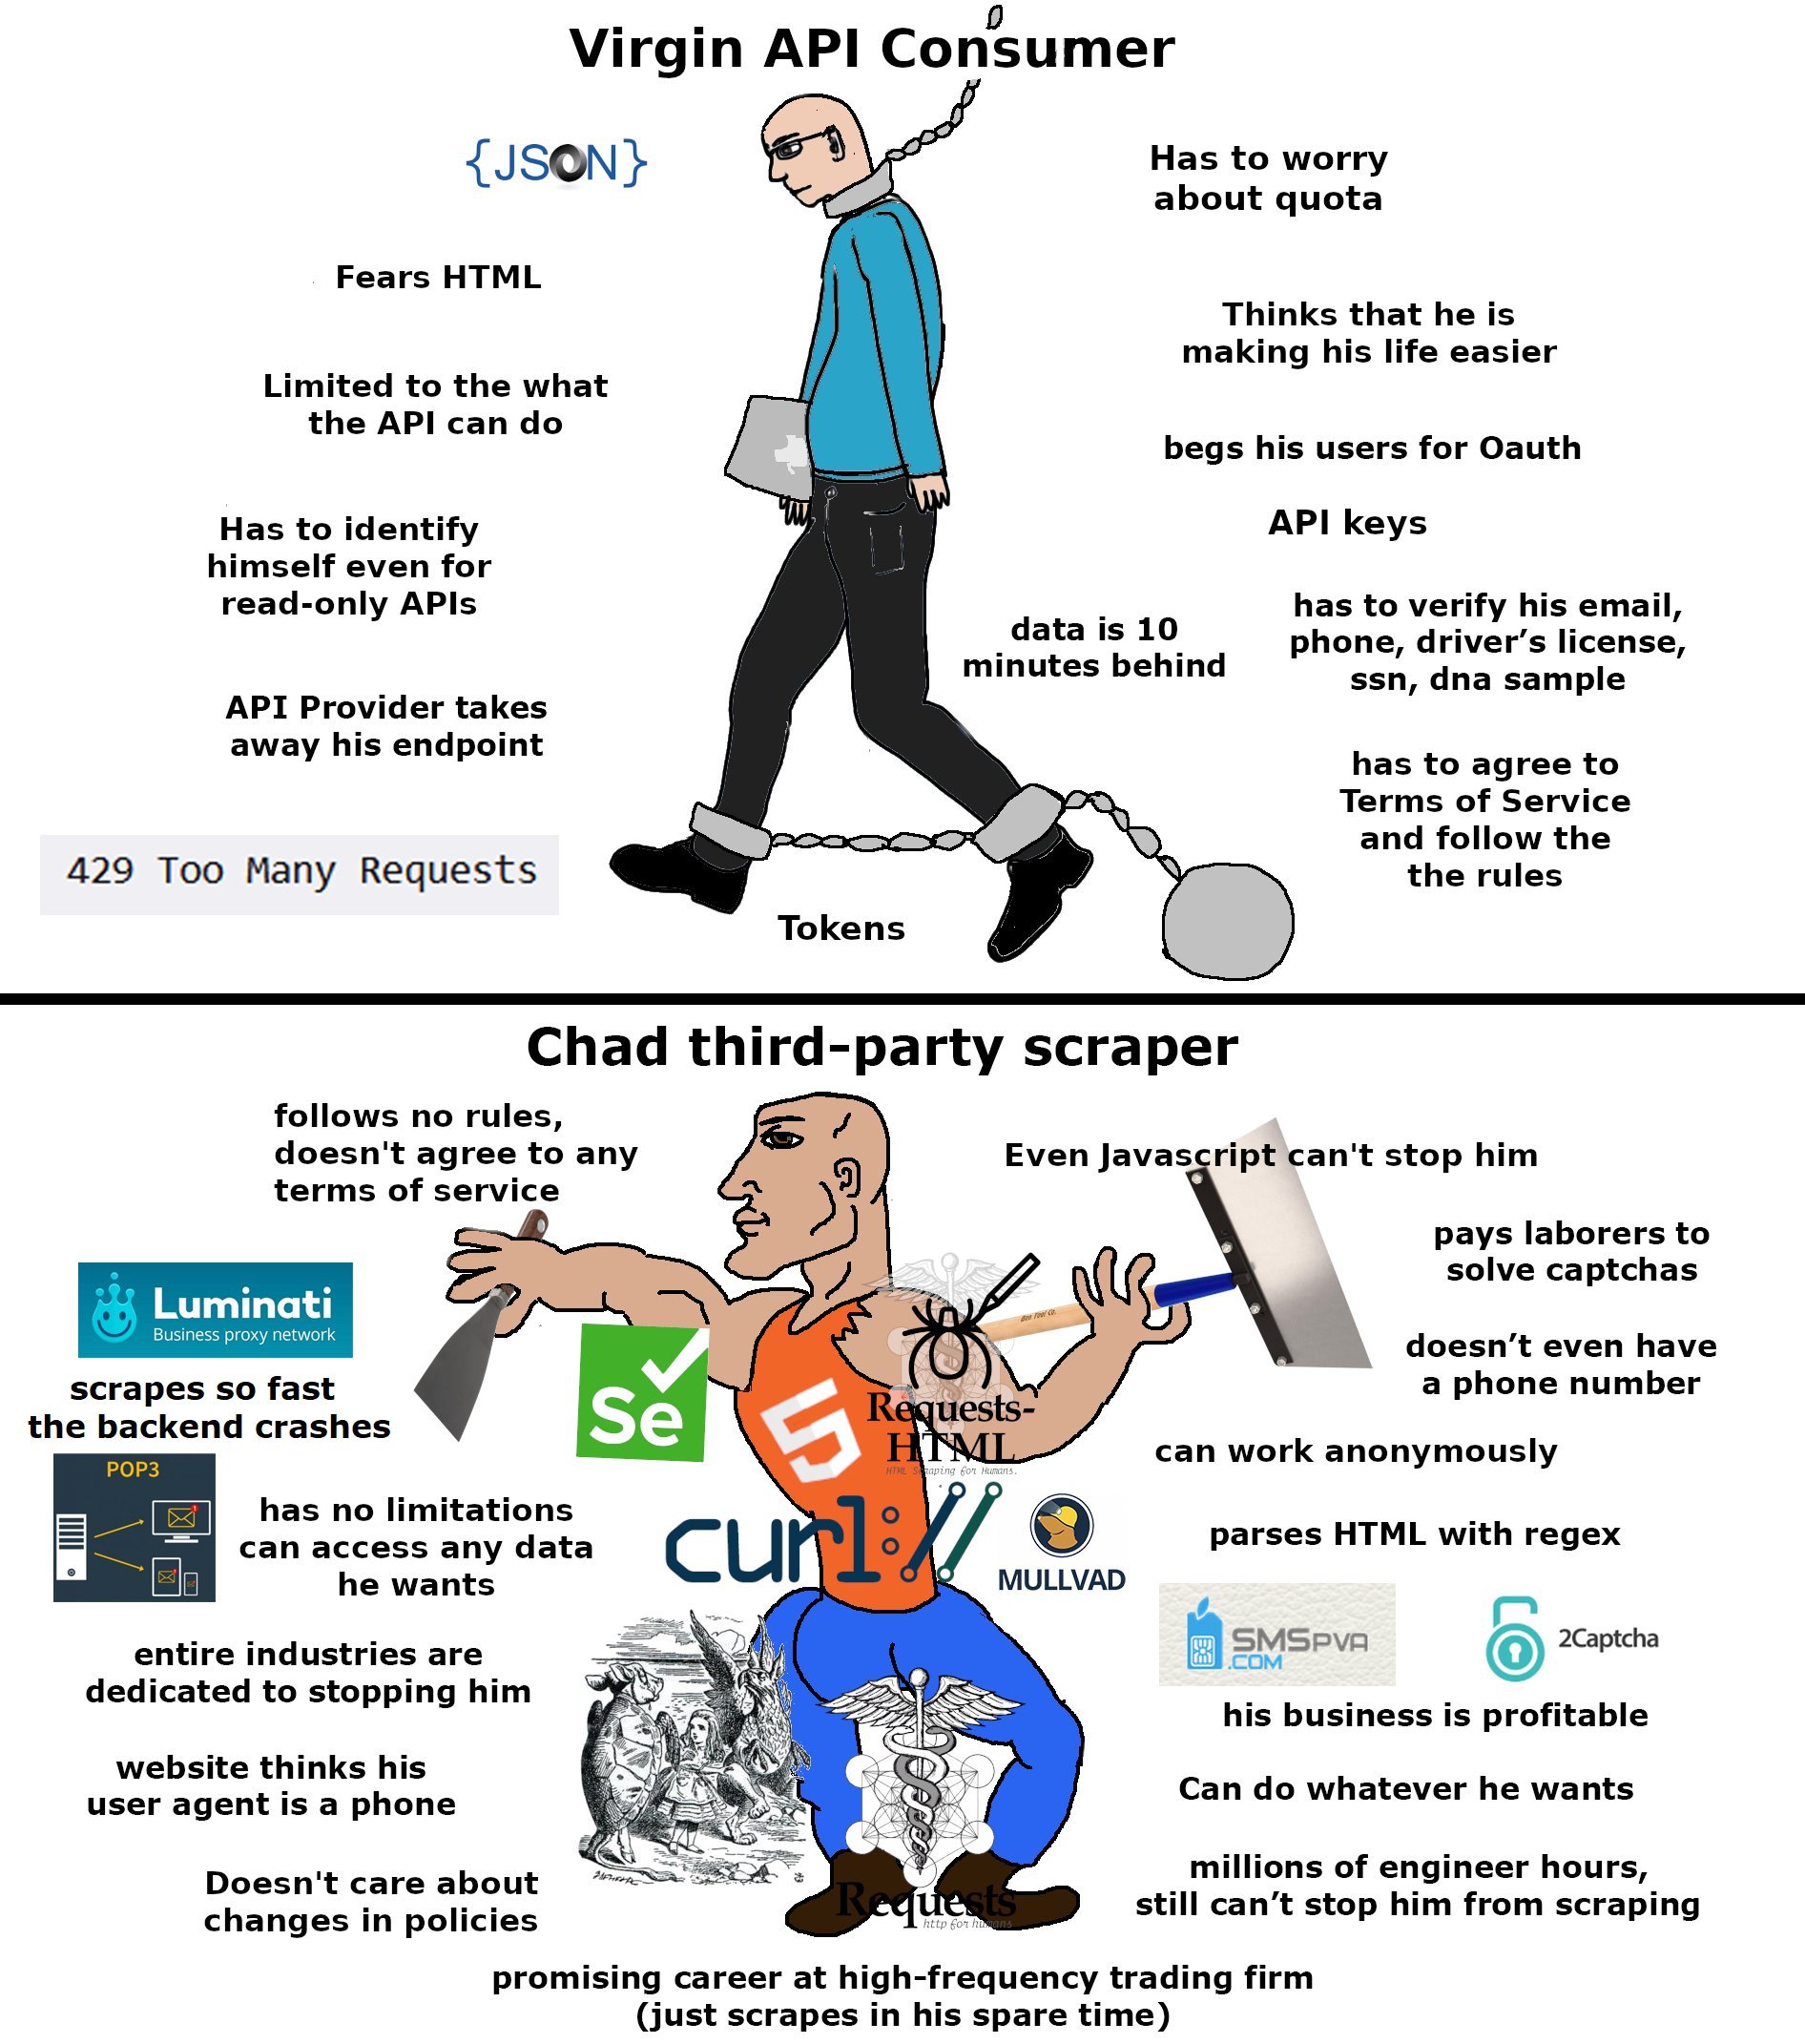 The Virgin Vs Chad Meme Is Taking Over the Entire Internet